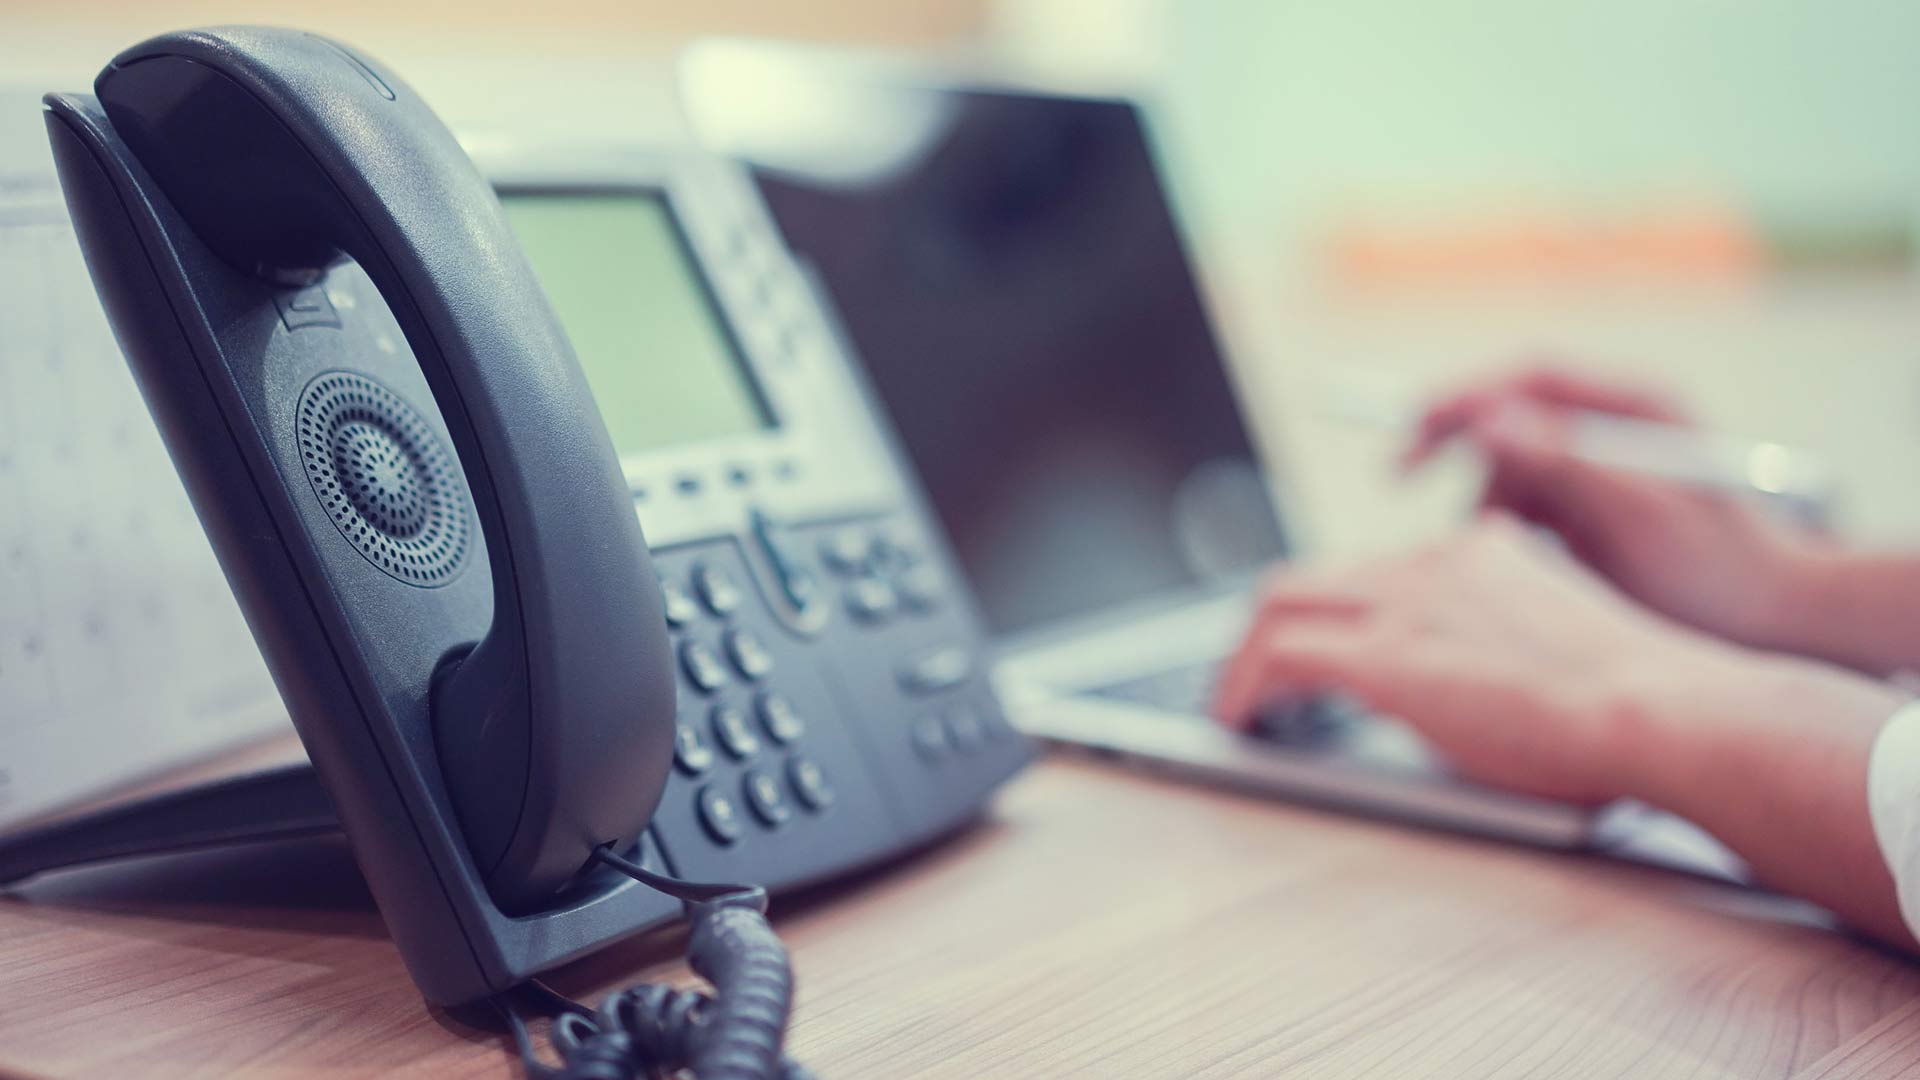 VoIP features that can benefit your small business